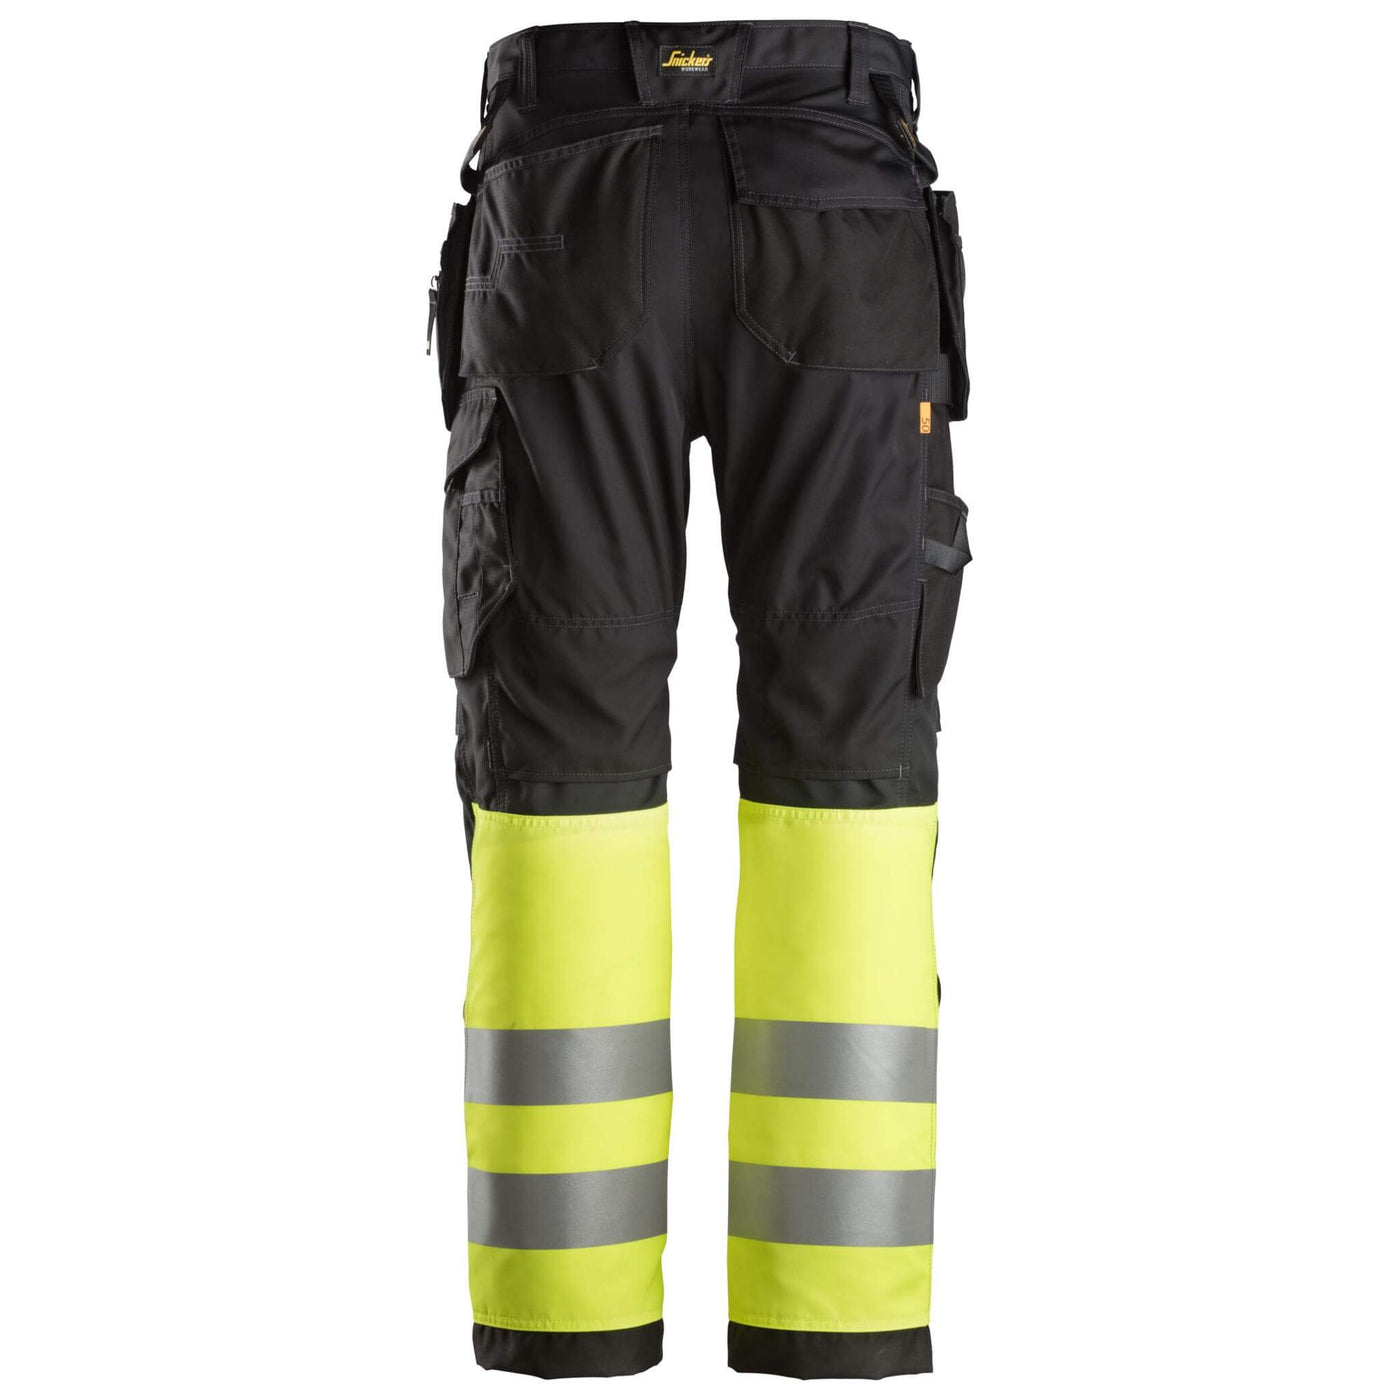 Snickers 6233 Hi Vis Work Trousers with Holster Pockets Class 1 Black Hi Vis Yellow back #colour_black-hi-vis-yellow